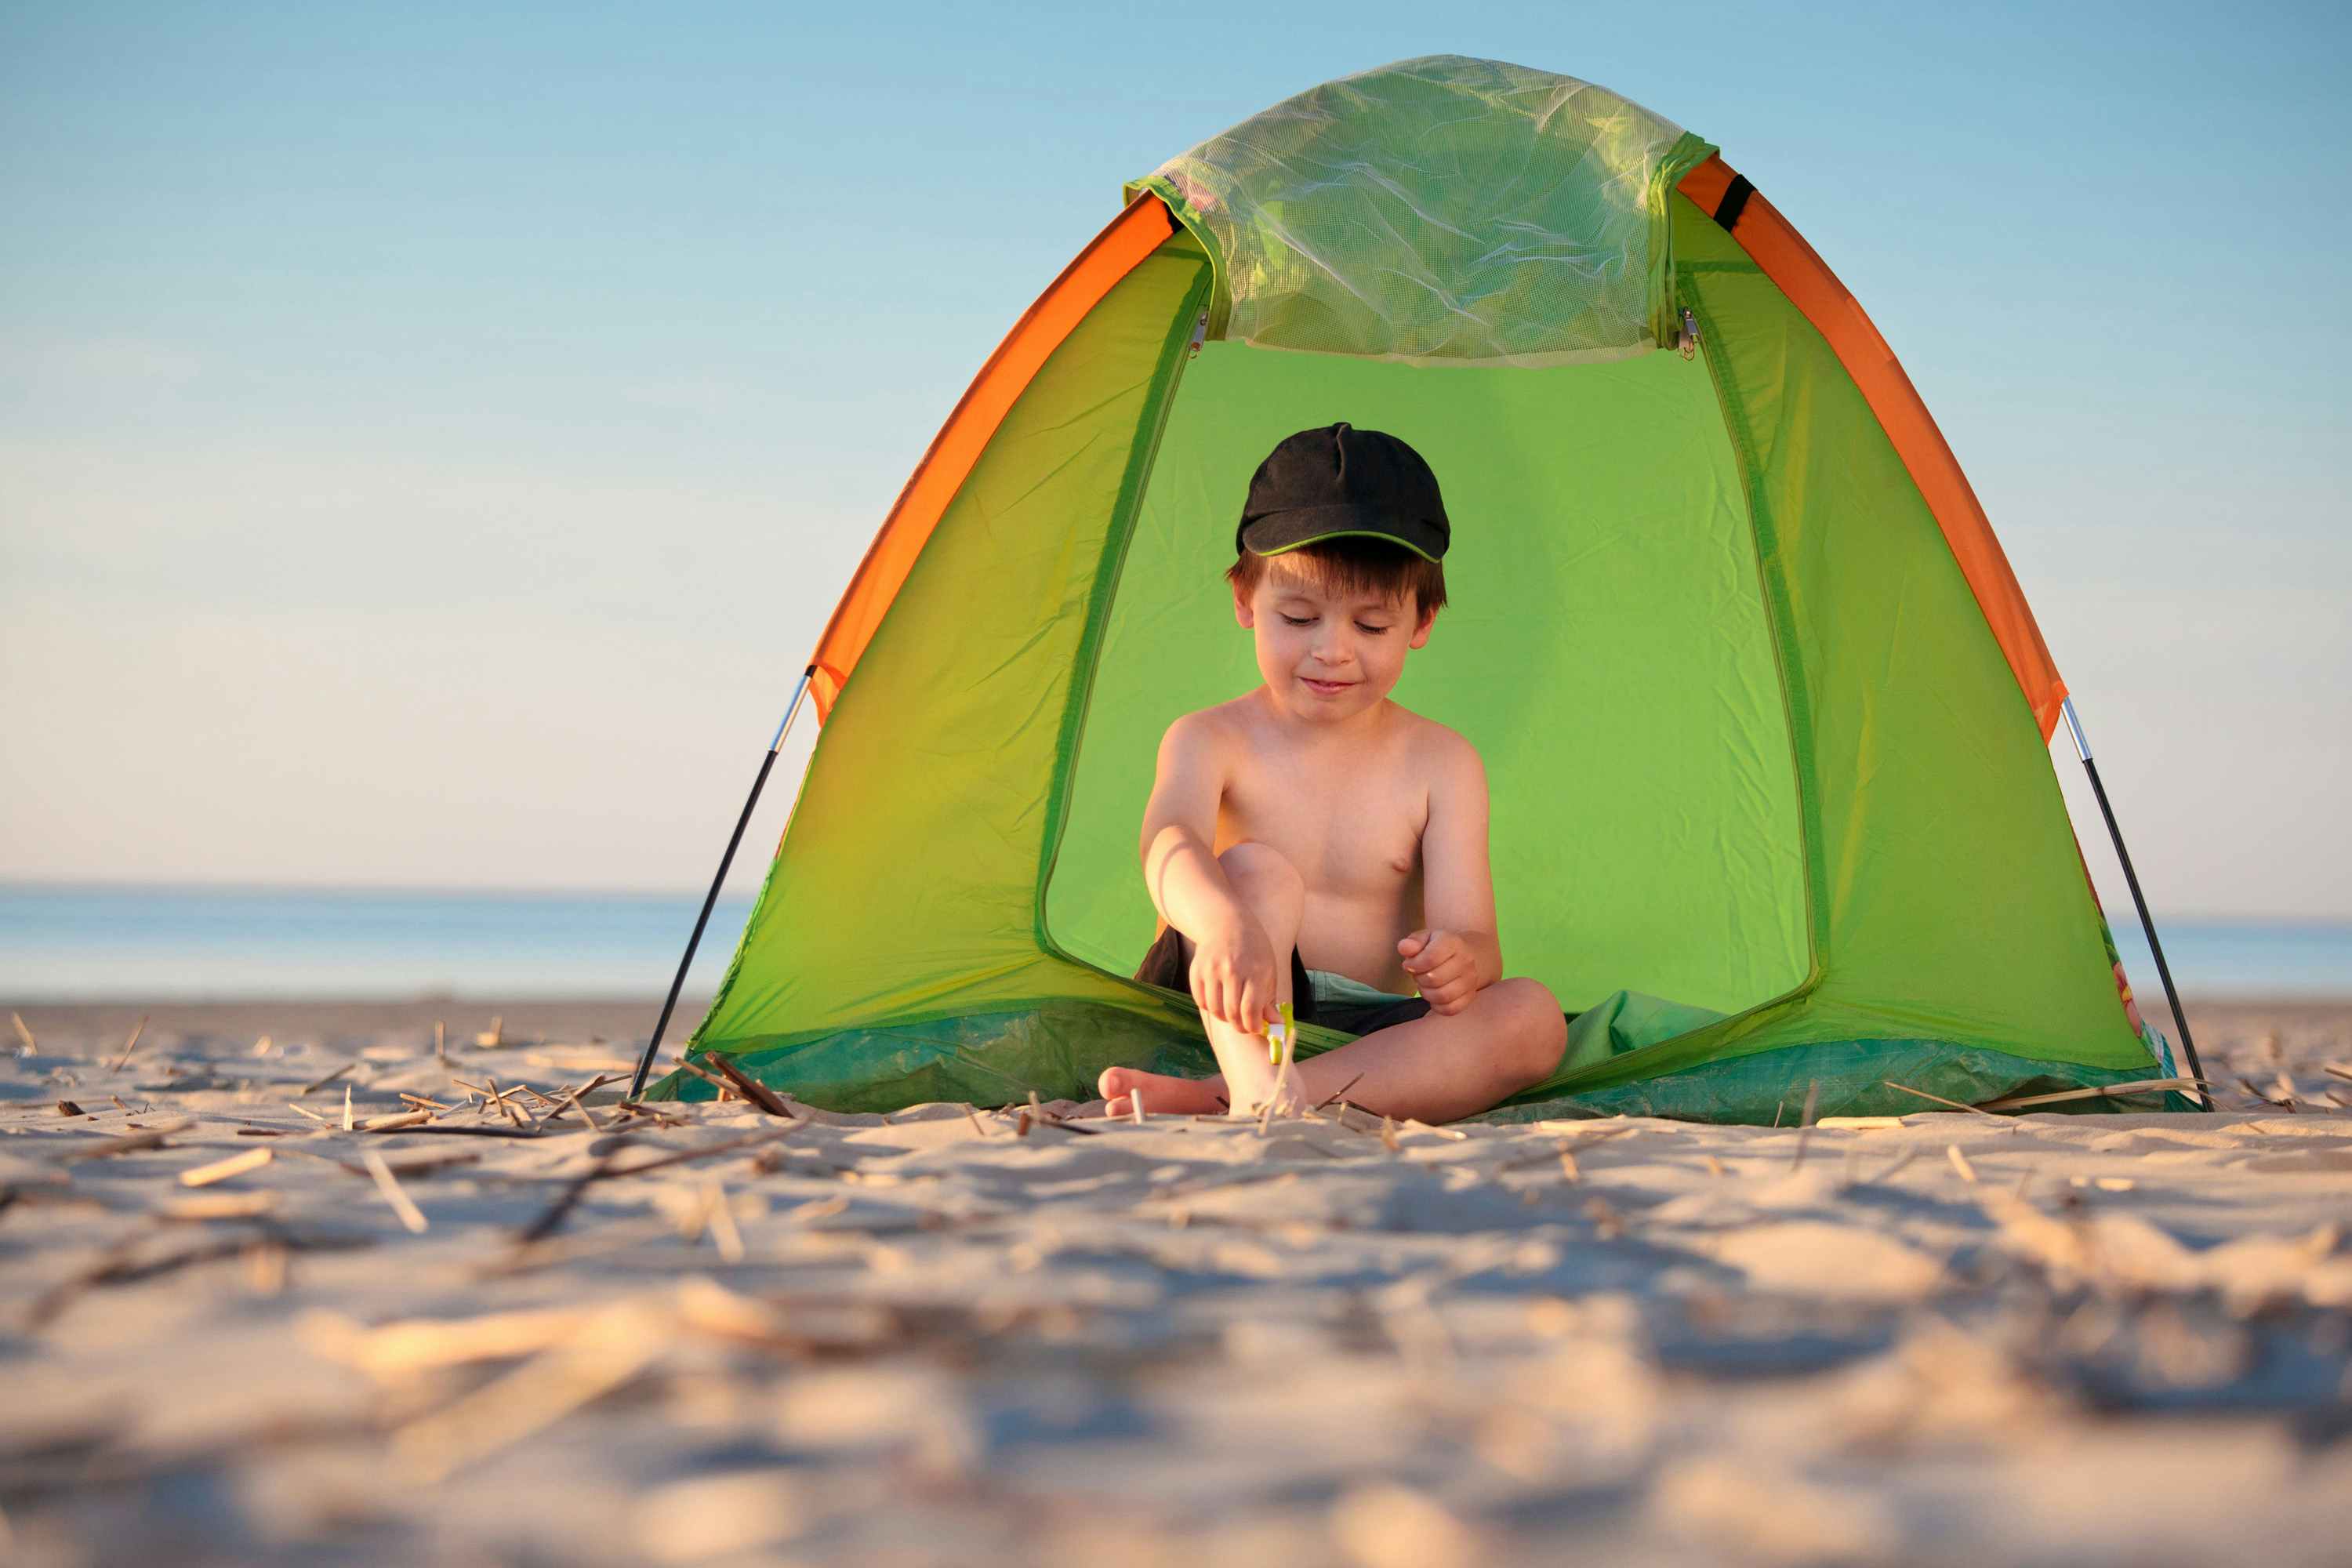 Child at a beach pplaying with sand under a small tent